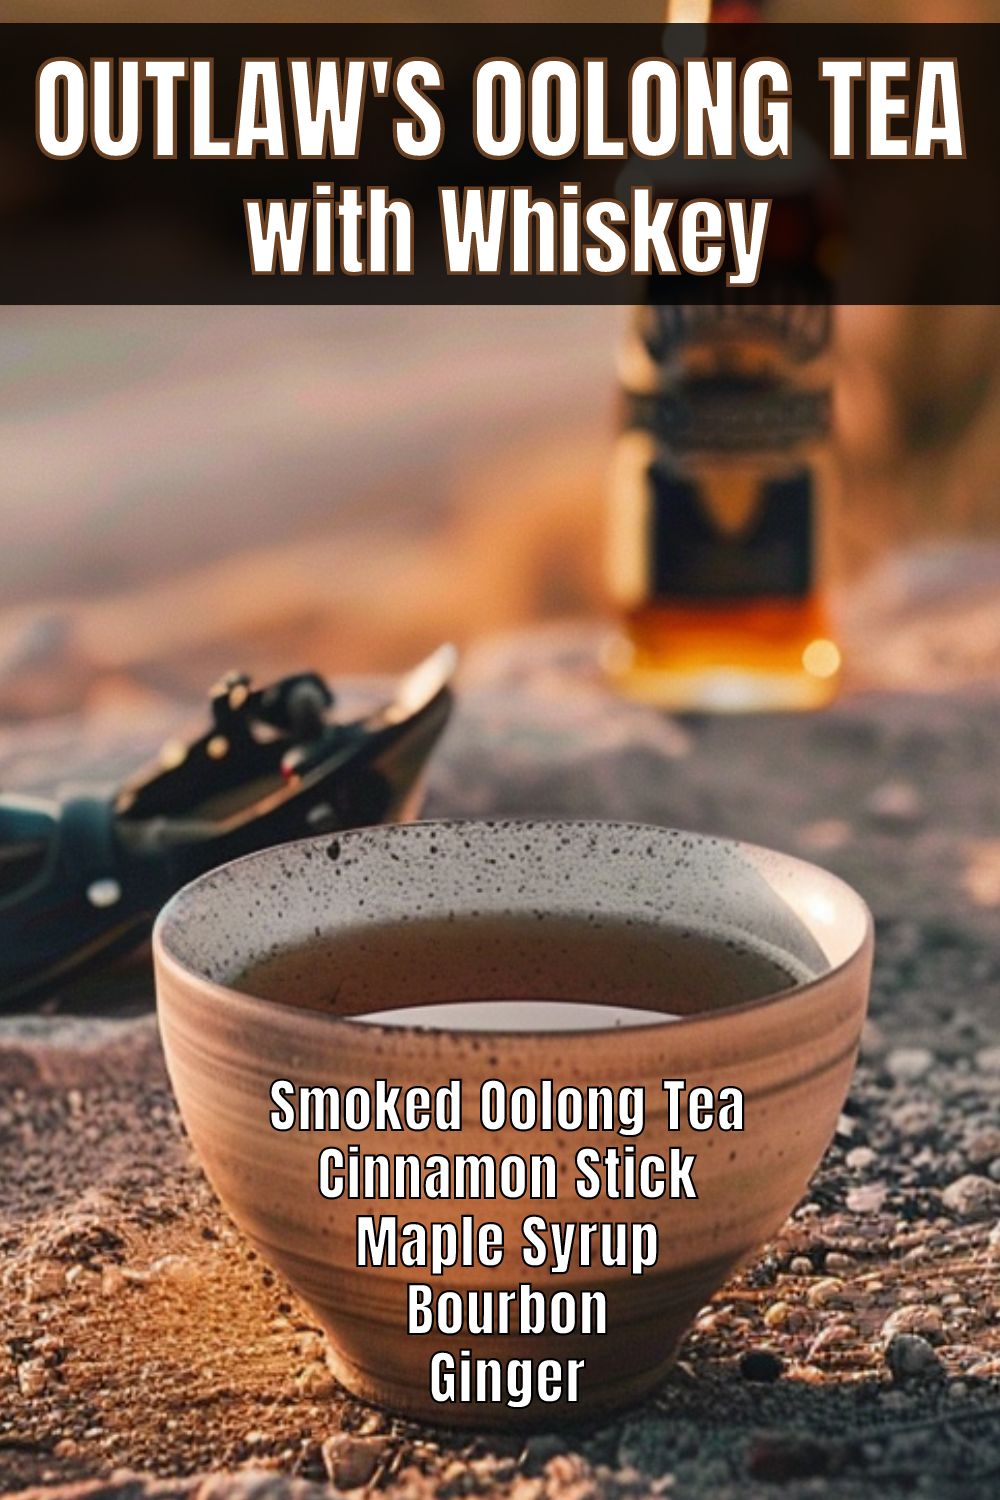 Outlaw's Oolong Tea with Whiskey